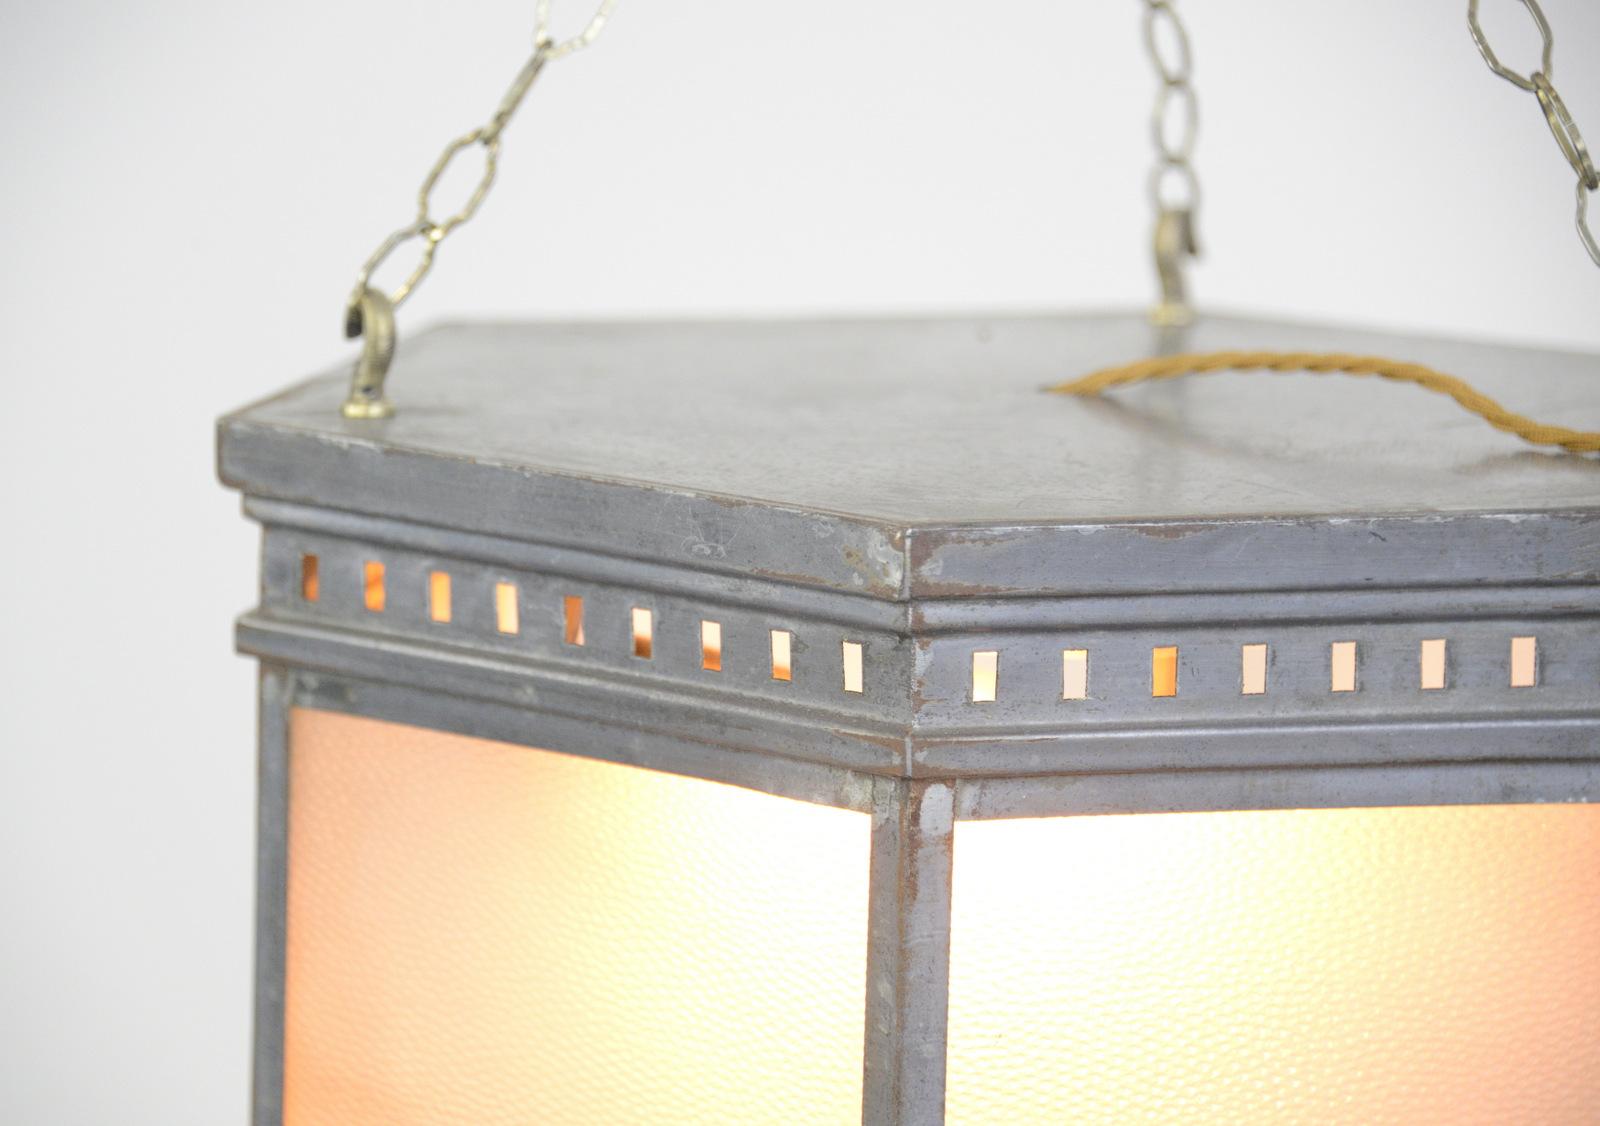 Pewter cinema light, circa 1910

- Pewter frame
- Patterned glass bottom and sides
- Takes E27 bulbs
- English ~ 1910
- 41cm x 41cm x 20cm

Condition report

Some patina to the metal surfaces, fully re wired with modern electrical